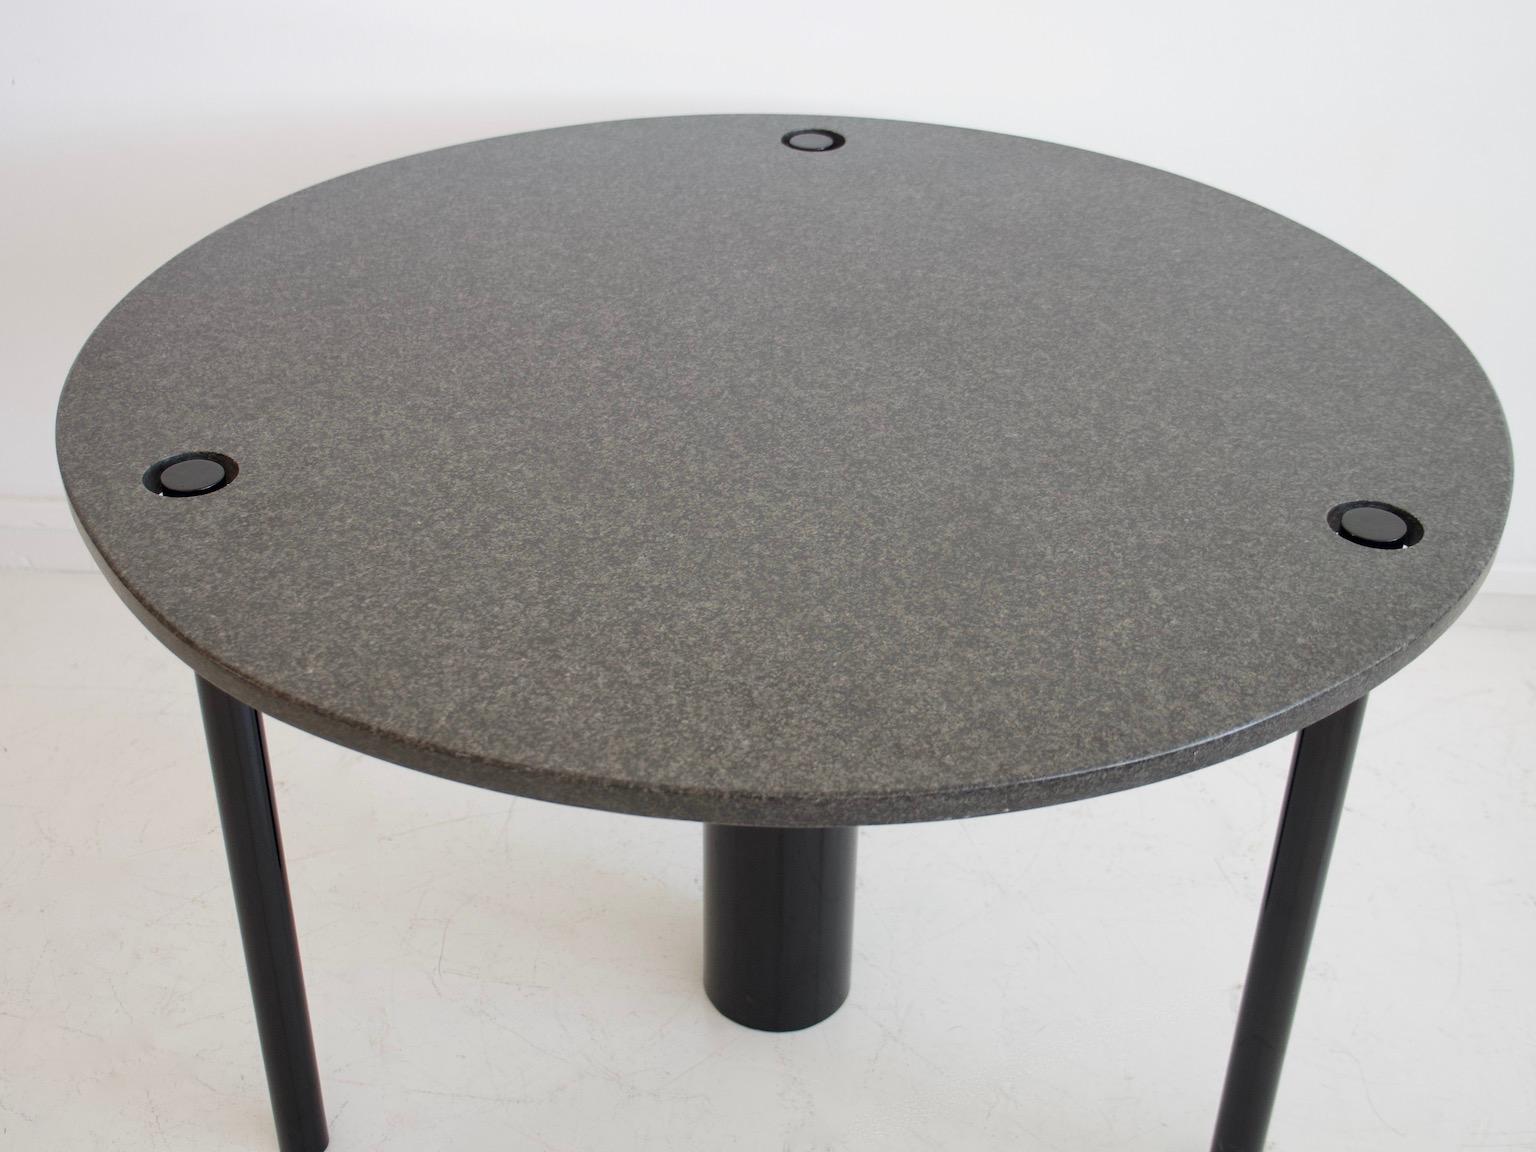 20th Century Round Dining Table of Black Lacquered Metal and Granite